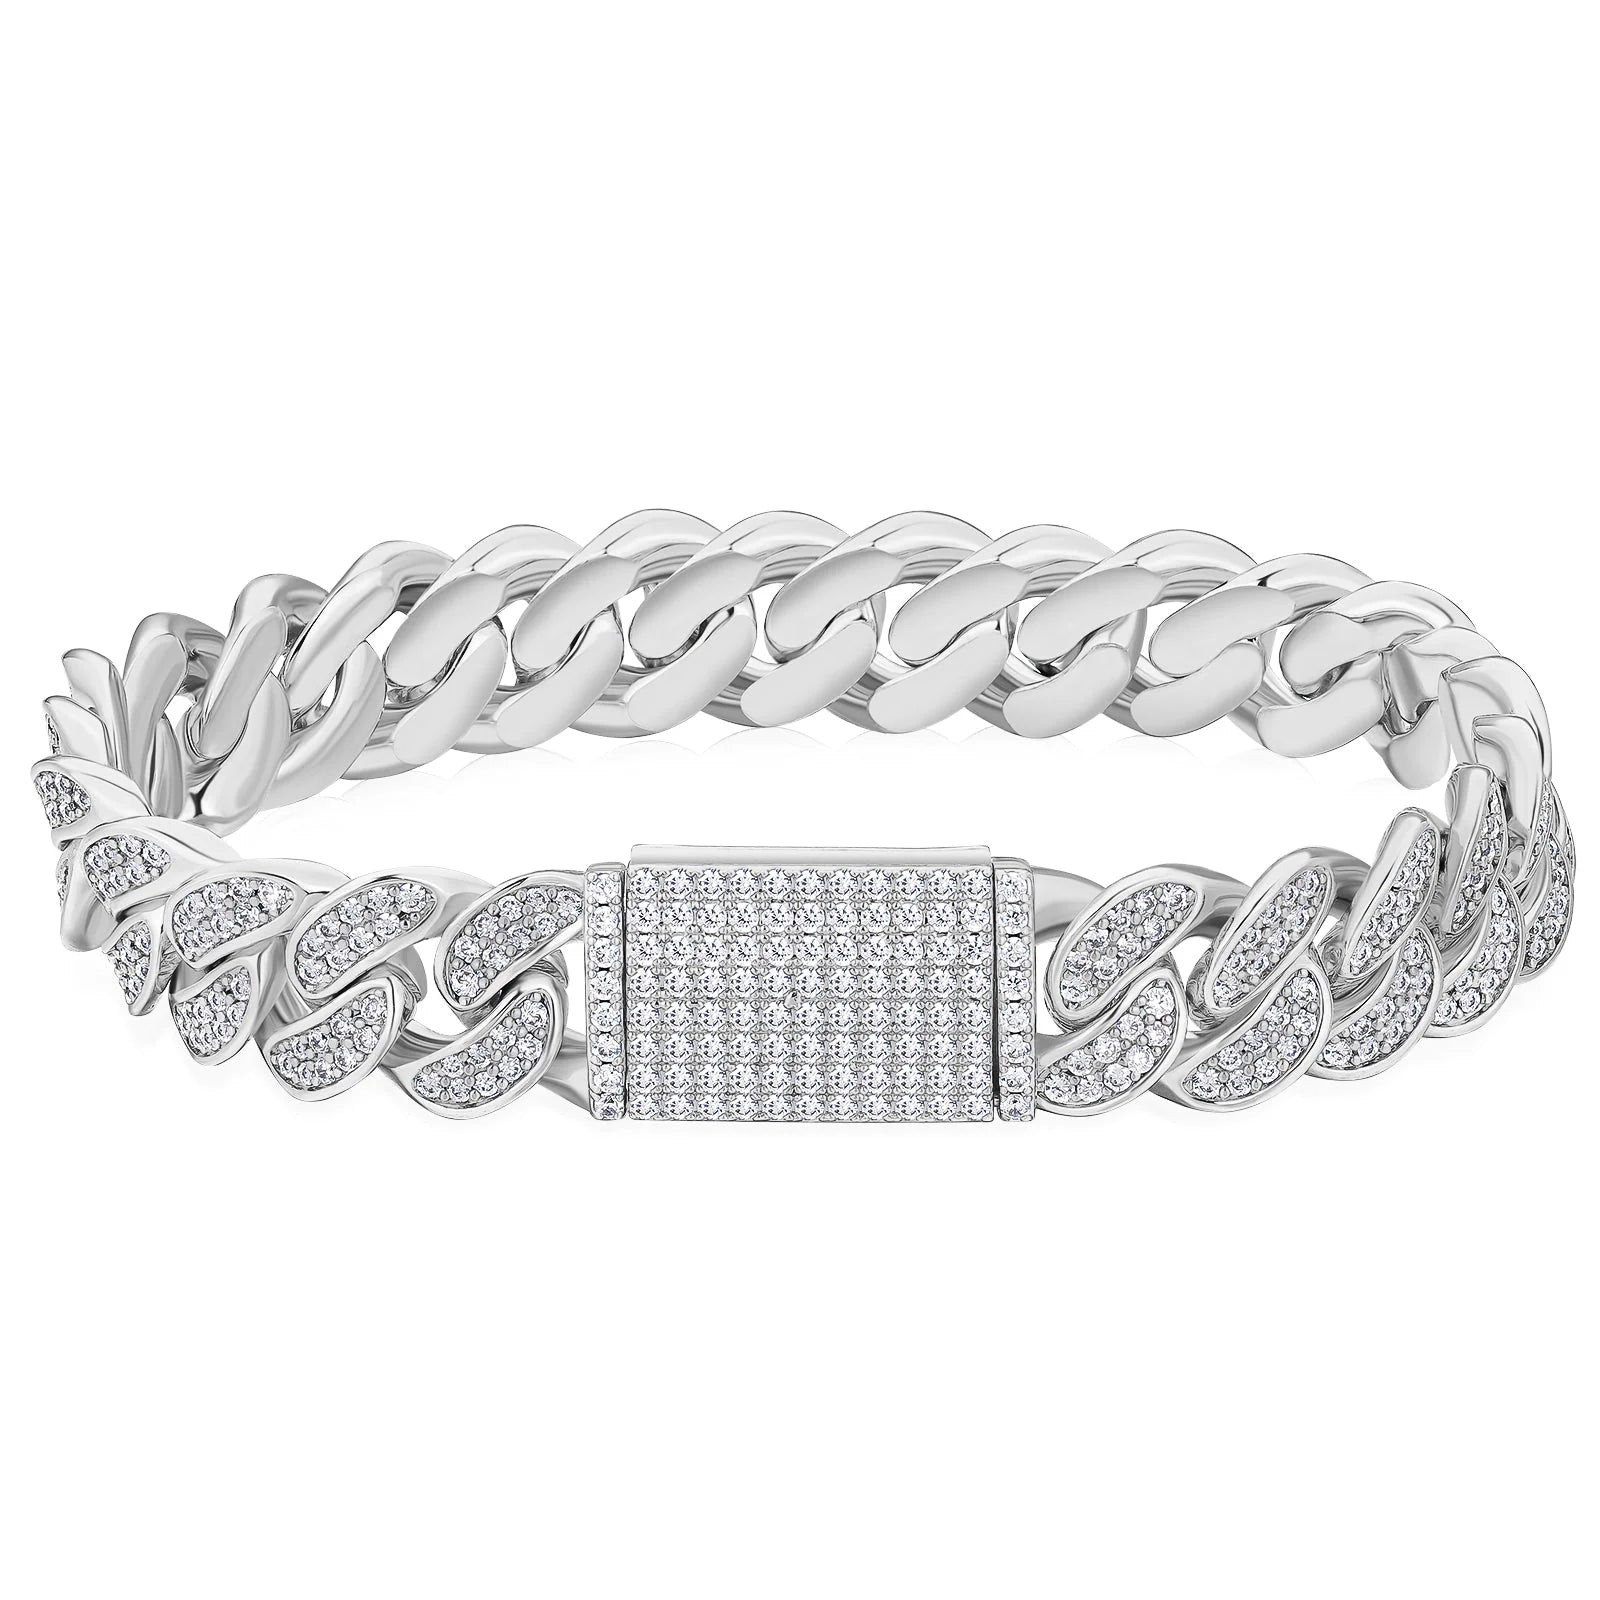 Iced Out Diamond Cuban Link Bracelet in White Gold - 12mm 